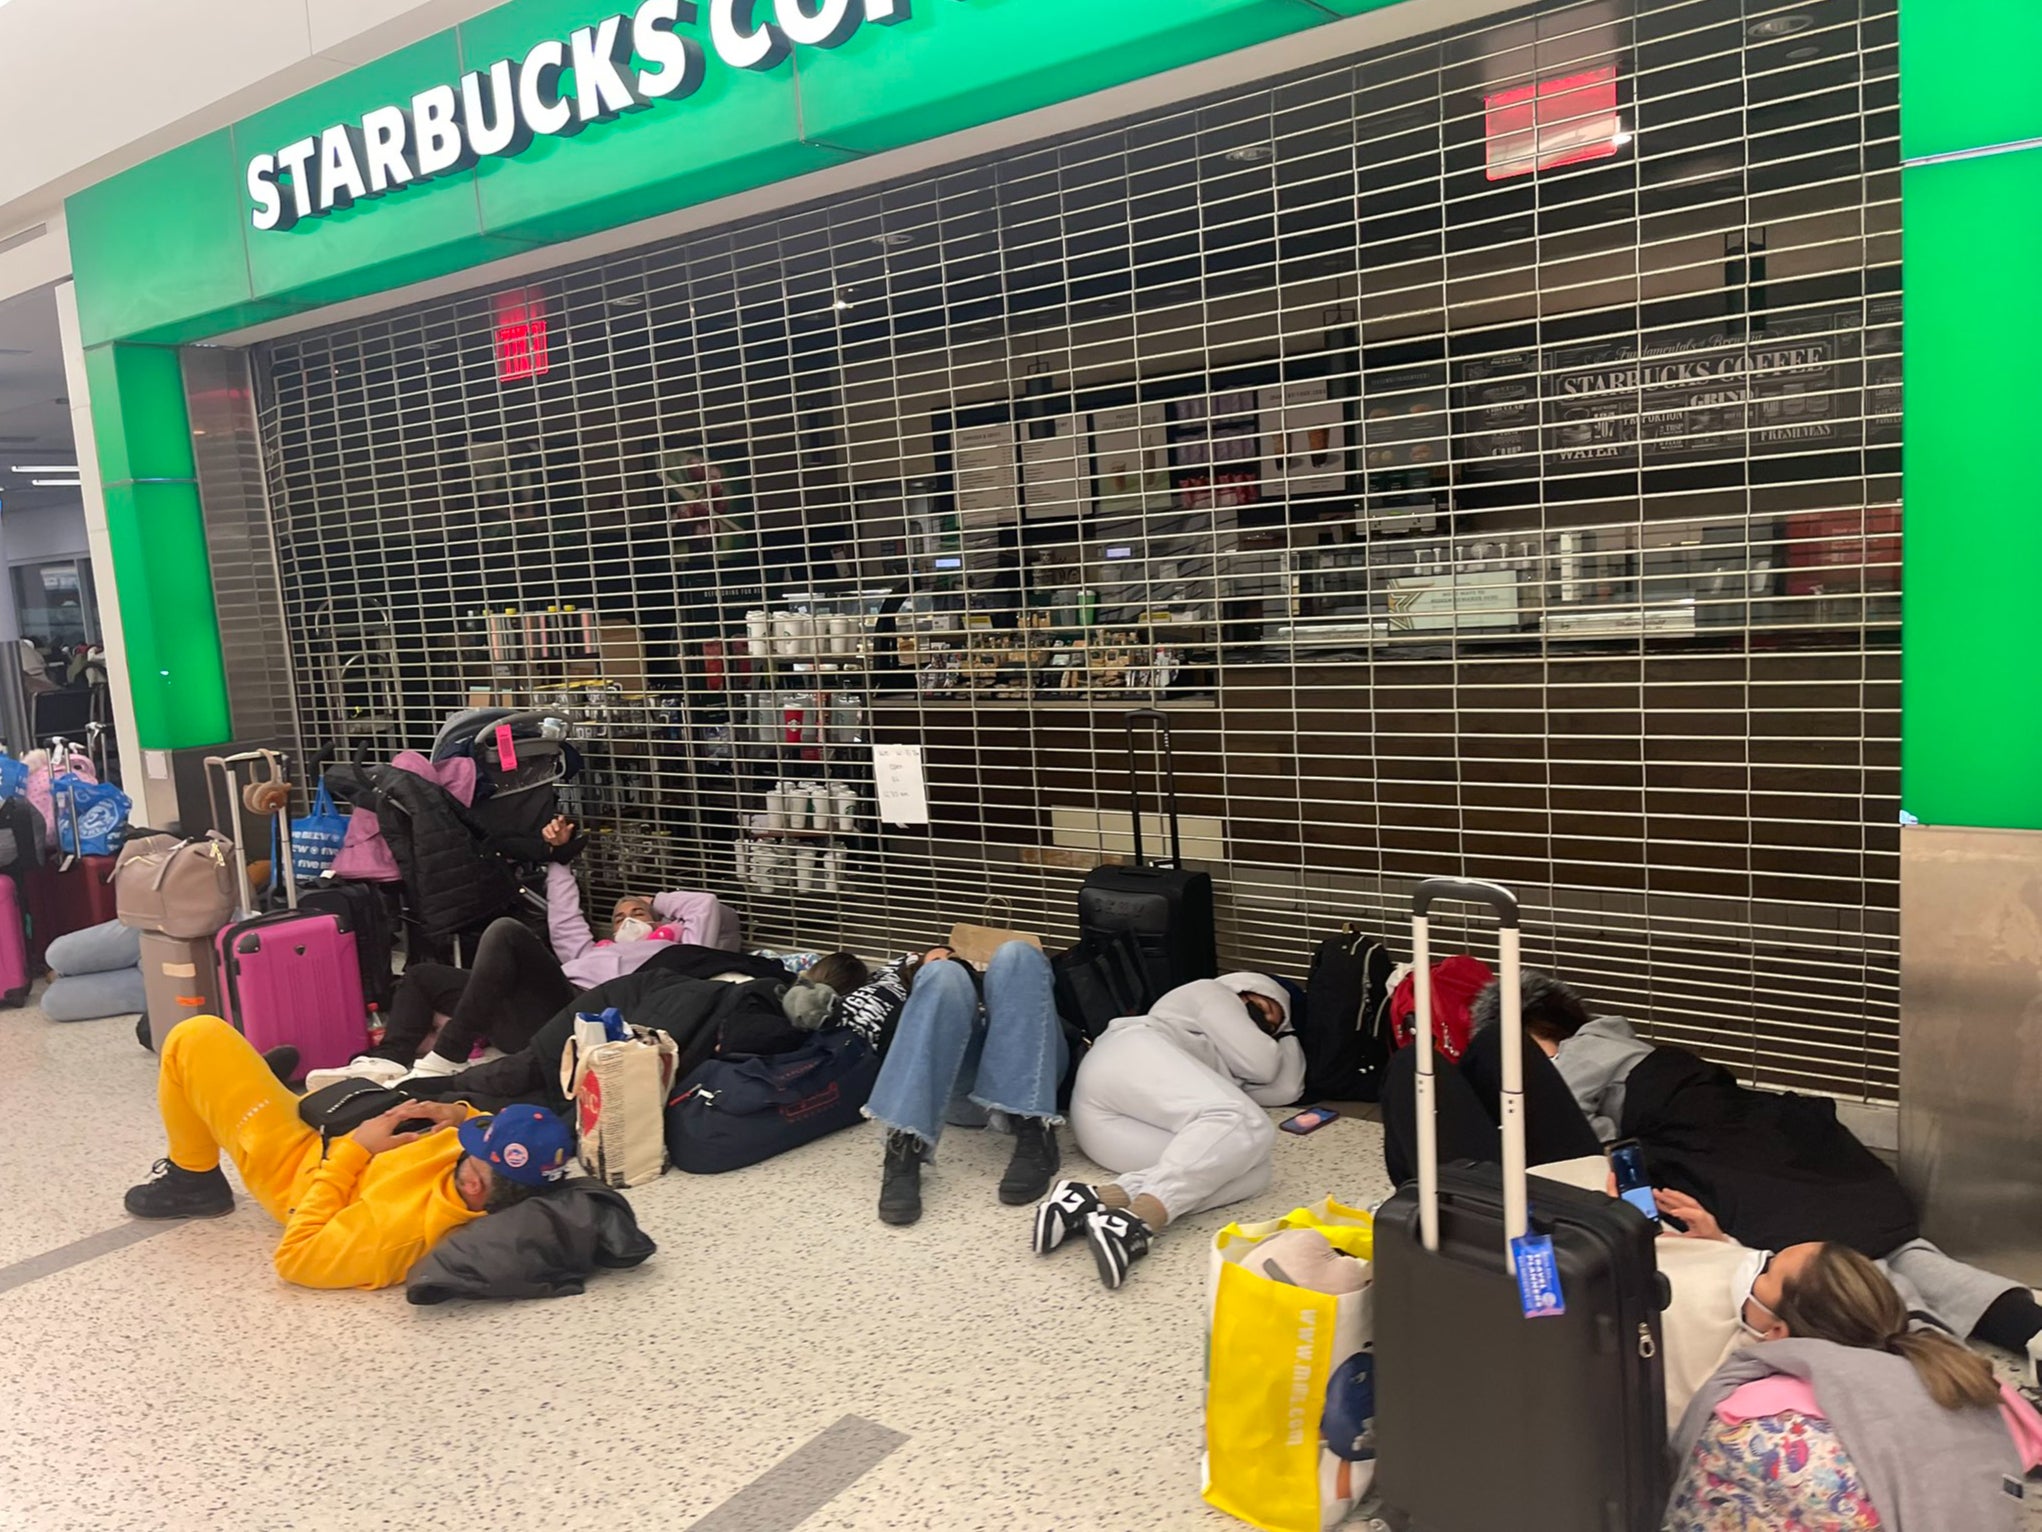 Jet Blue passengers sleep on the floor outside a Starbucks in JFK International Airport after delays left planes stranded on the tarmac for hours.